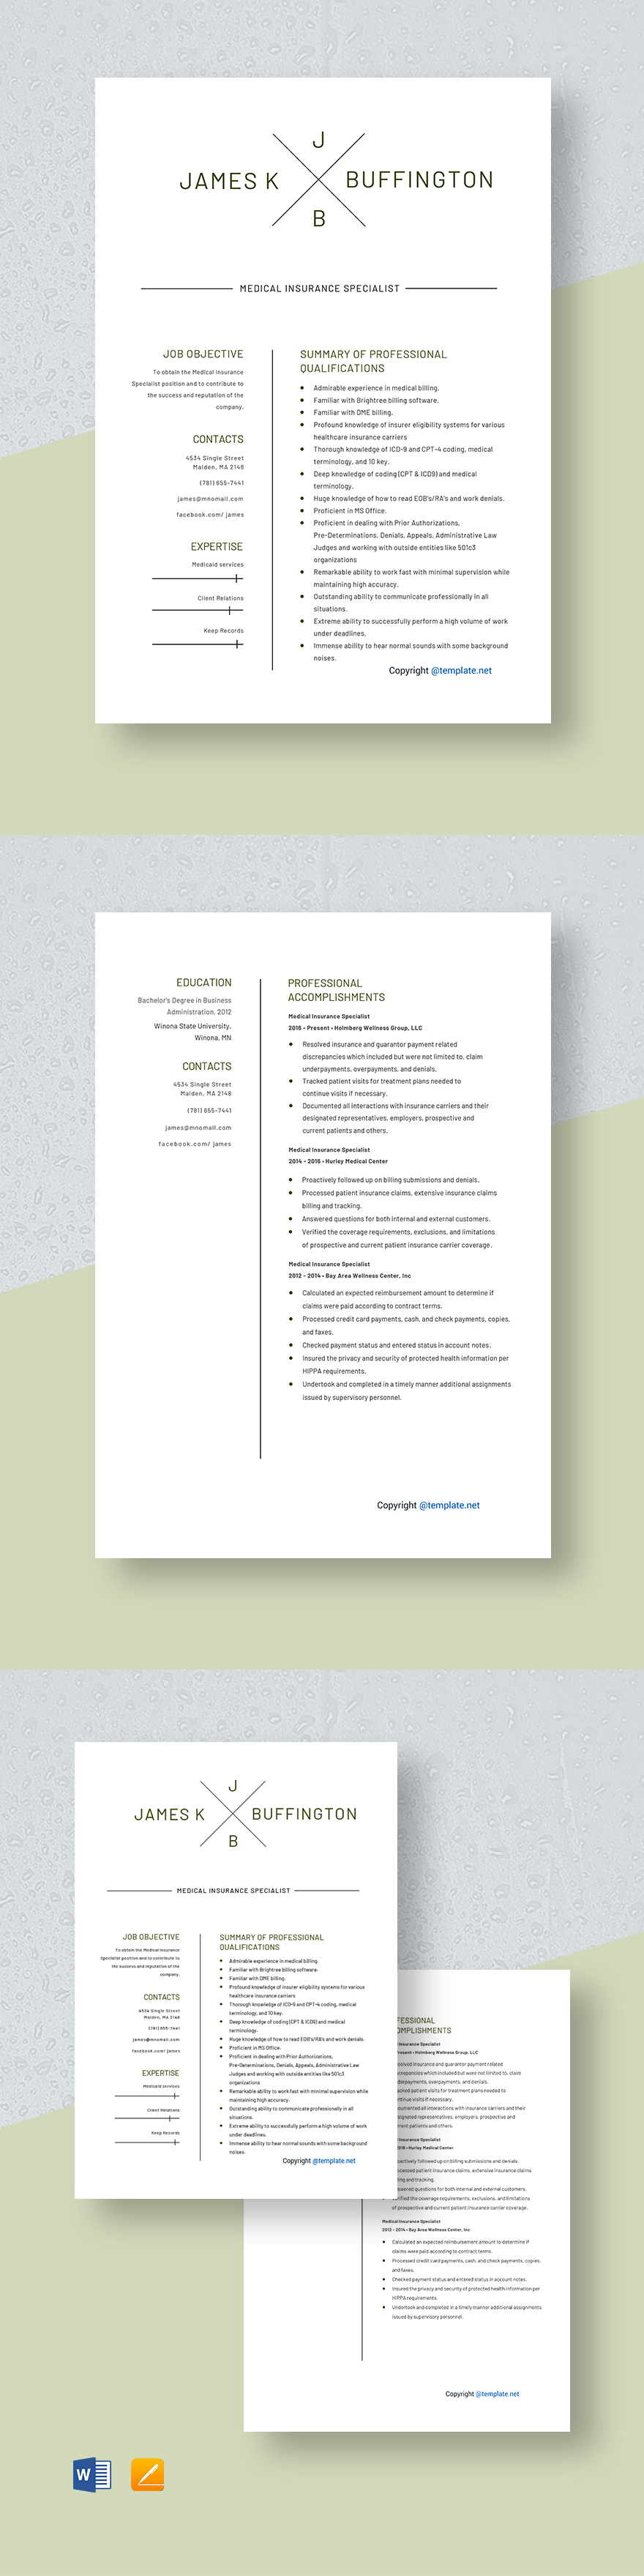 Medical Billing Specialist Resume Template - Word, Apple Pages ...